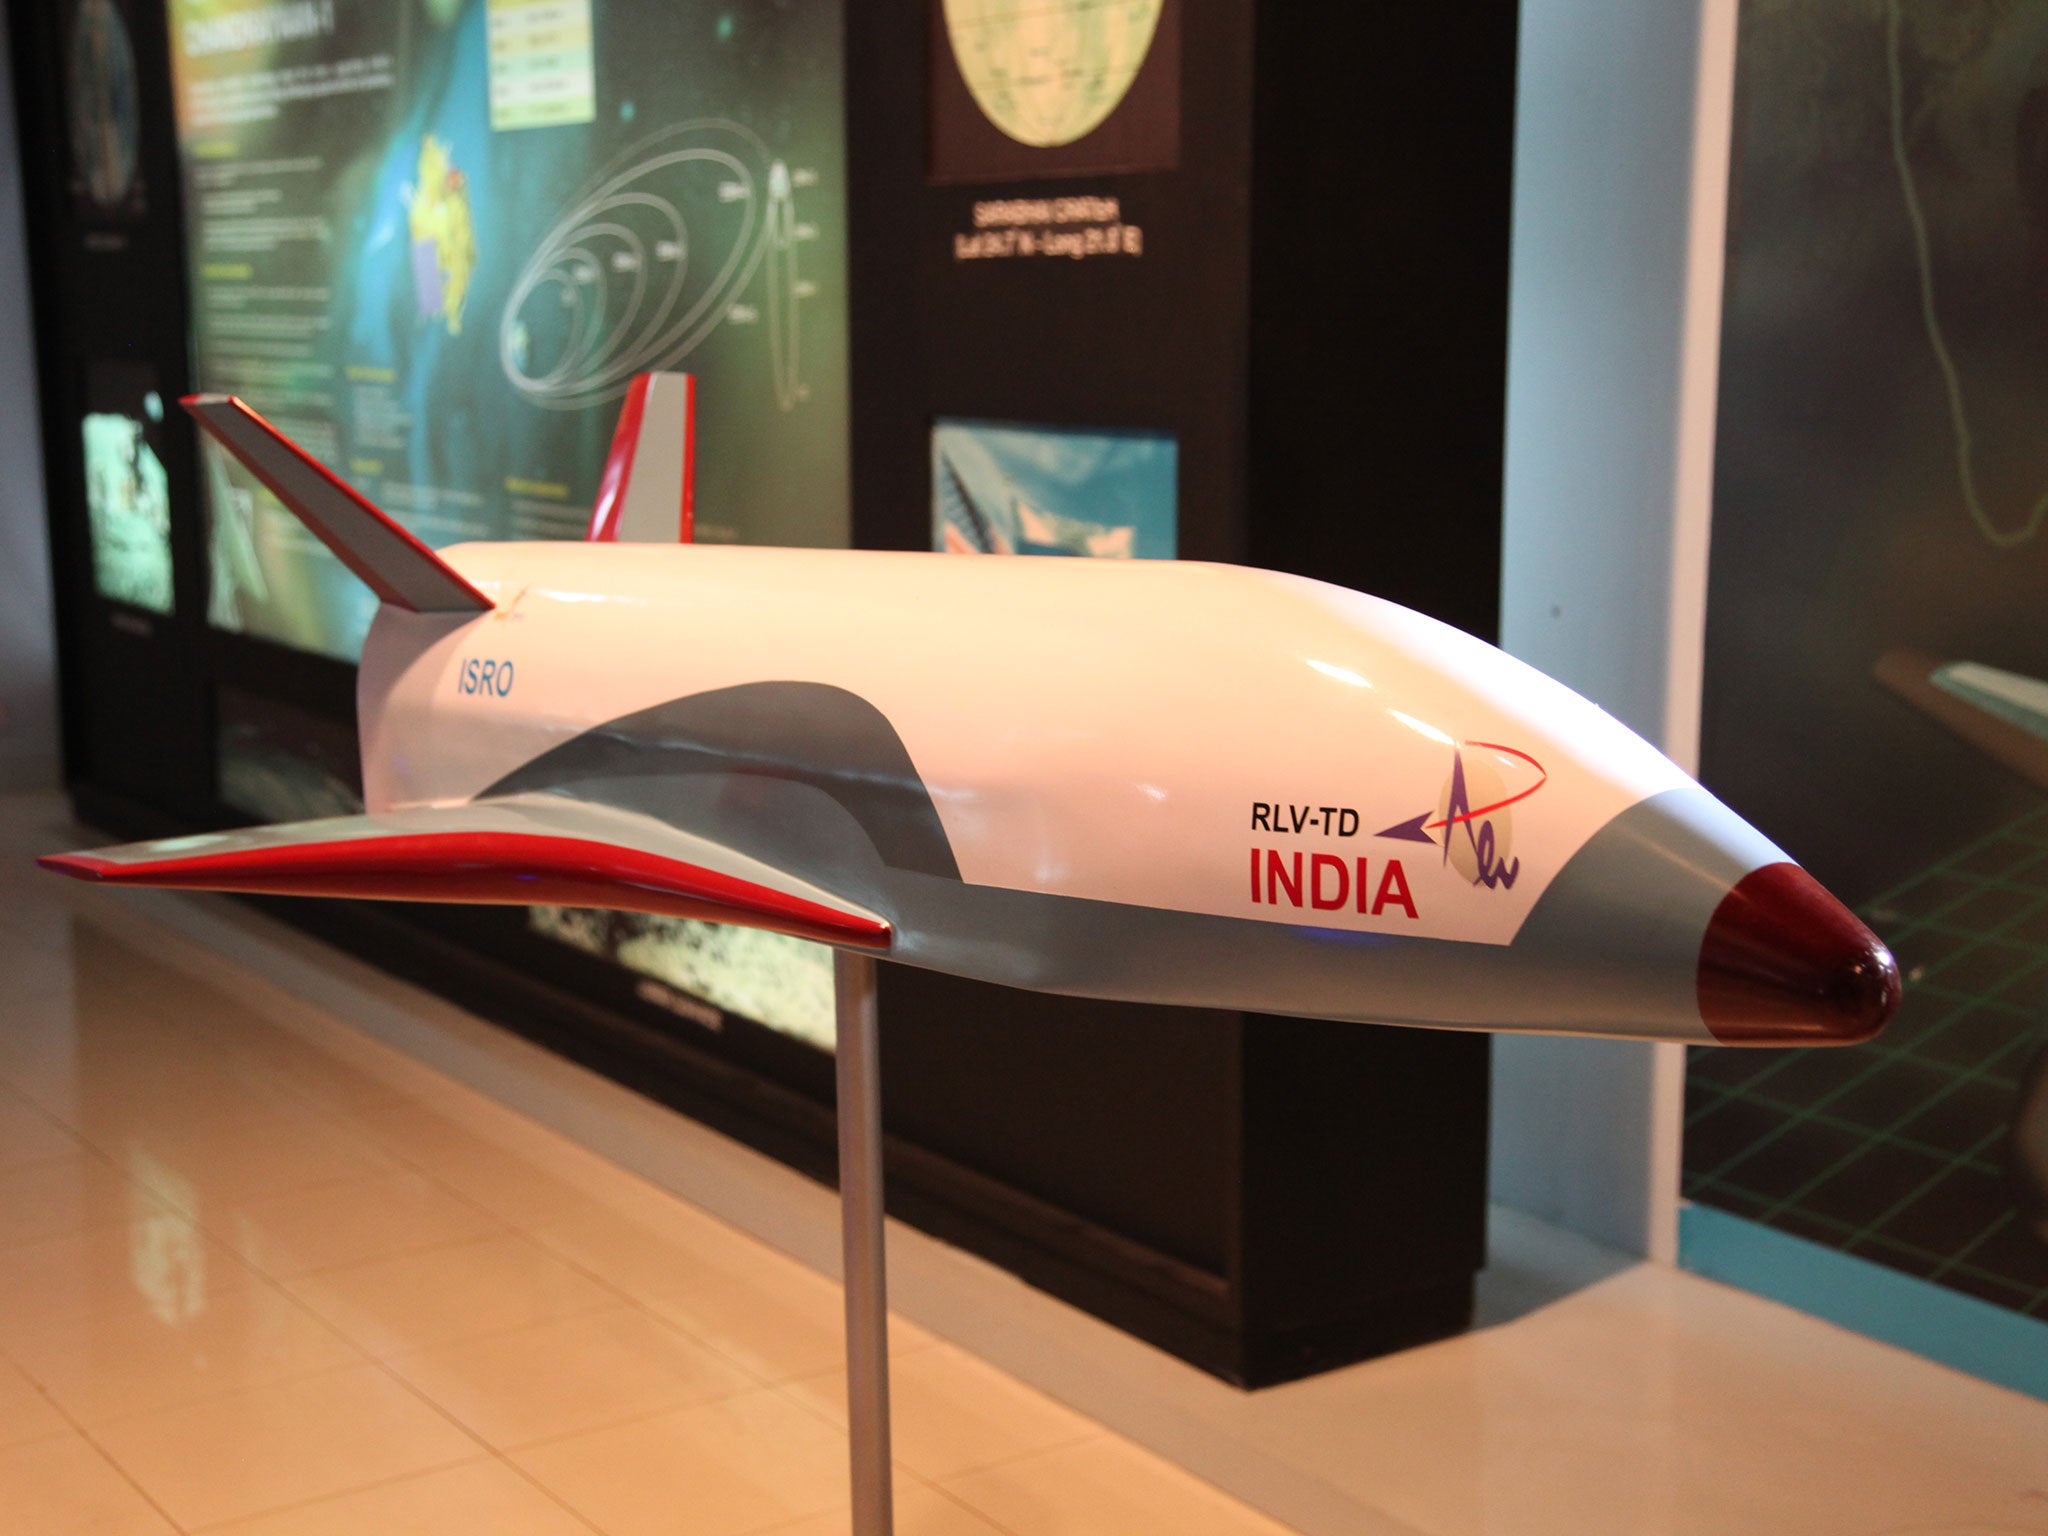 A model of the shuttle which was launched on 23 May